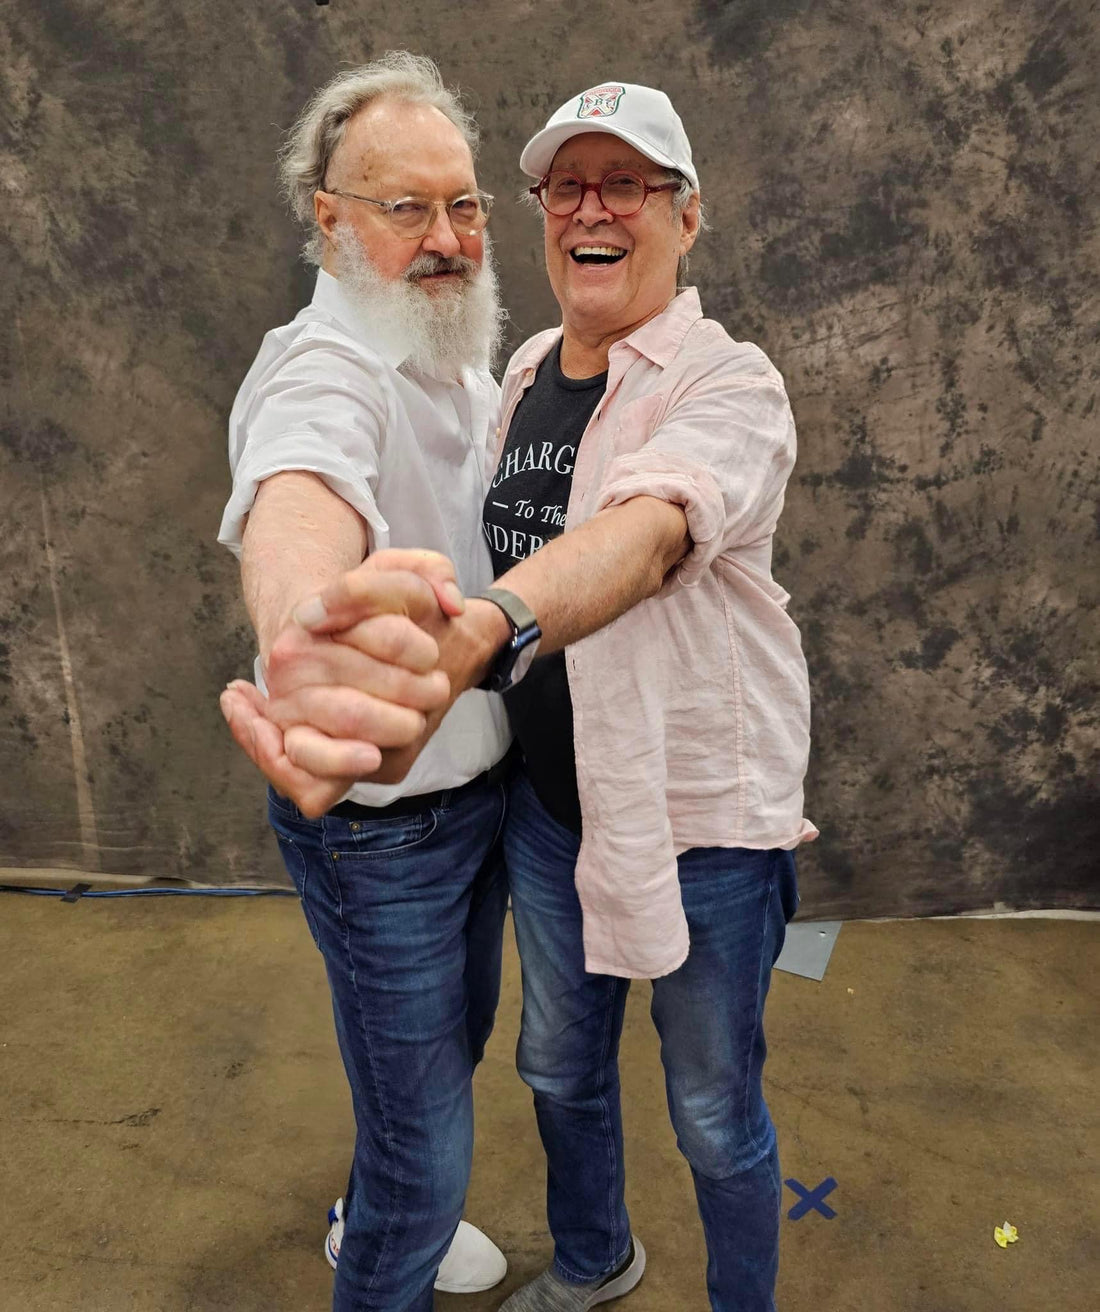 Chevy Chase and Randy Quaid reunited